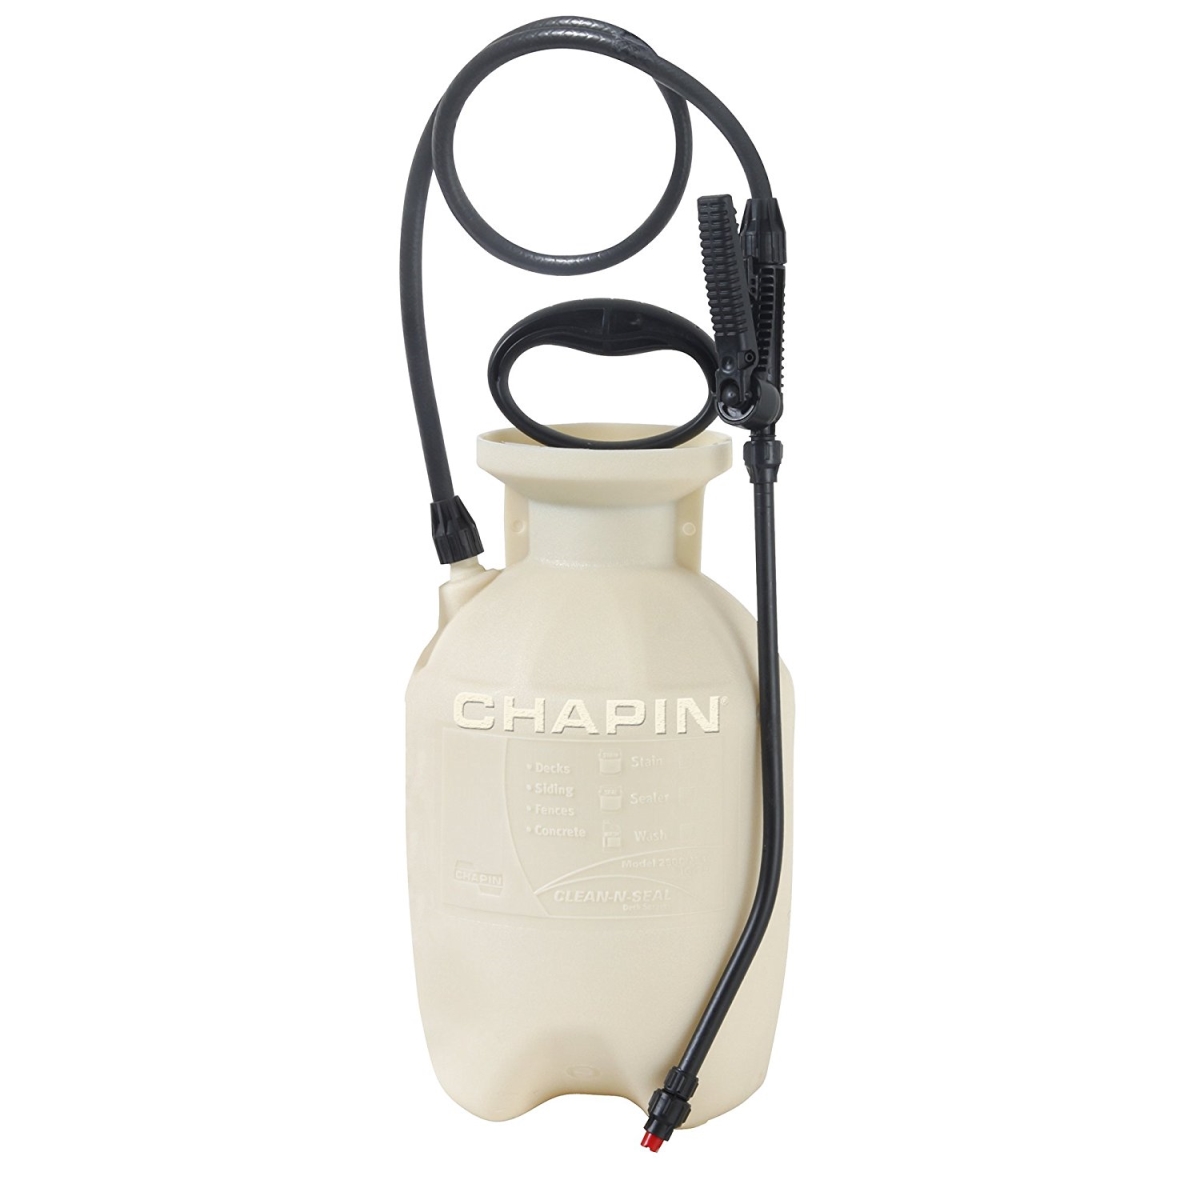 Picture of Chapin 139-25010 1 gal Clean - N Seal Polydeck Sprayer